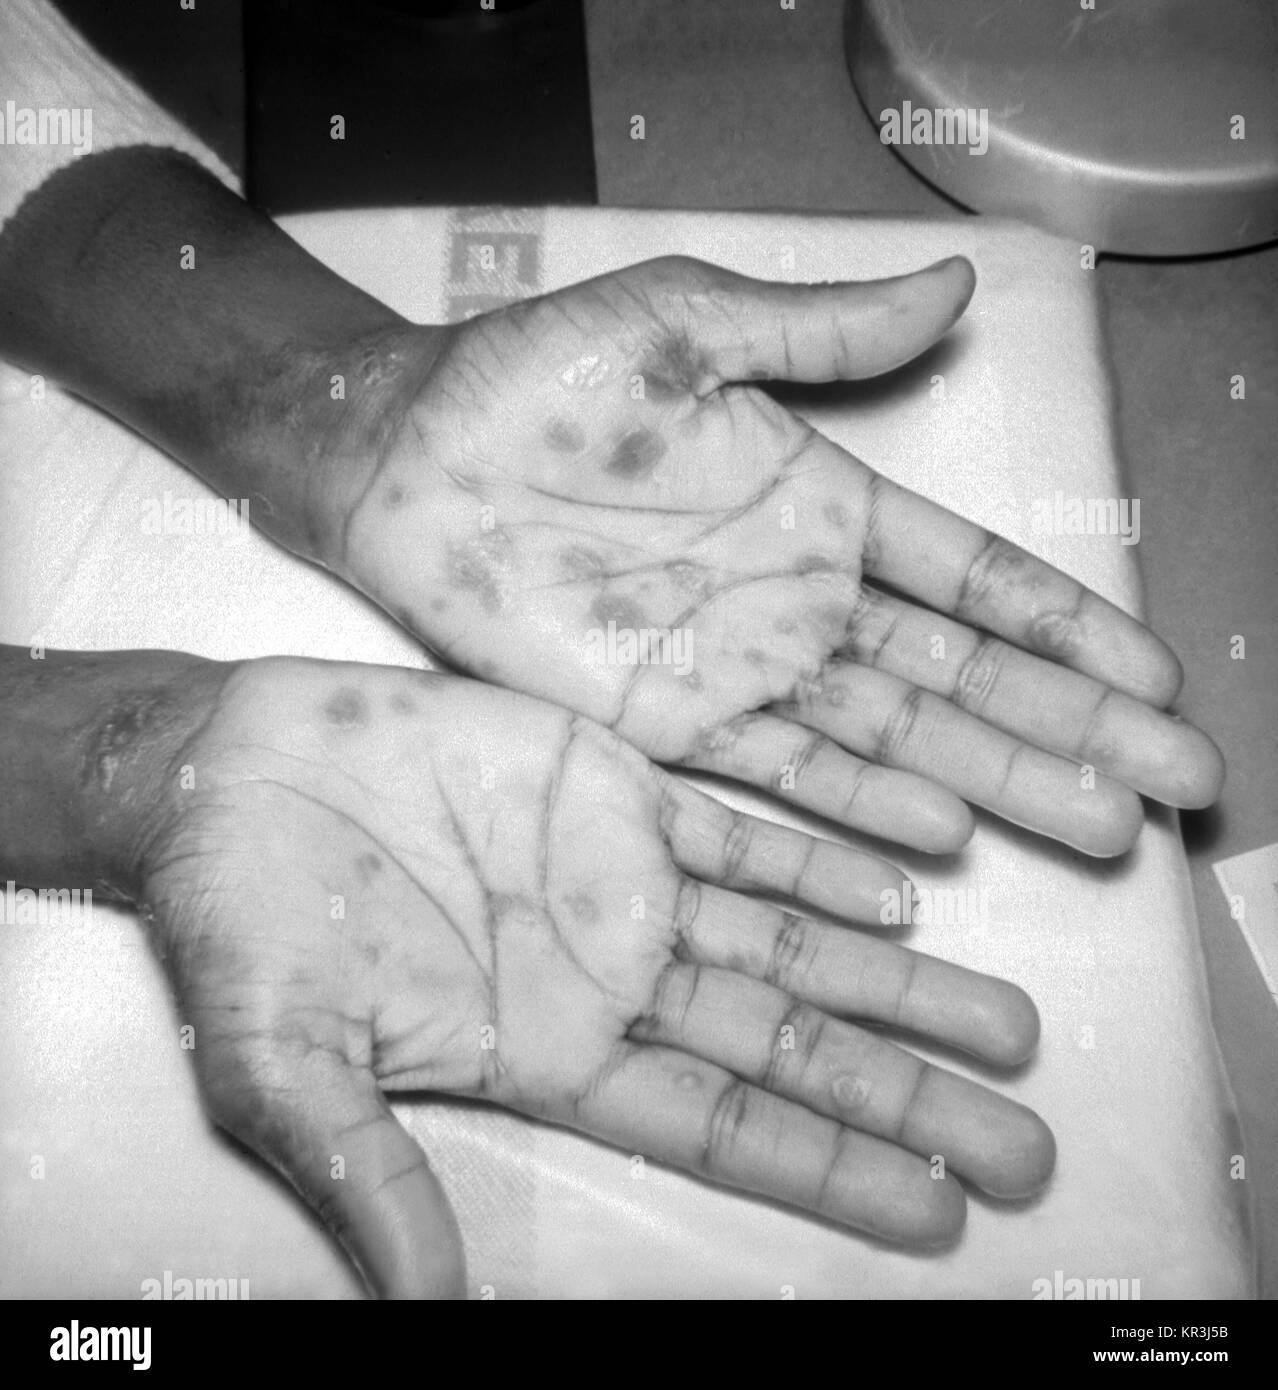 A patient with papulosquamous syphilids, or cutaneous eruptions of the disease, seen here on the wrist and palms. This patient presented with papulosquamous syphilids on the wrist and palms during the secondary stage of syphilis, 1971. The rash often appears as rough, red or reddish brown spots and can appear on both the palms of the hands and on the bottoms of the feet. Image courtesy CDC/Susan Lindsley. Stock Photo